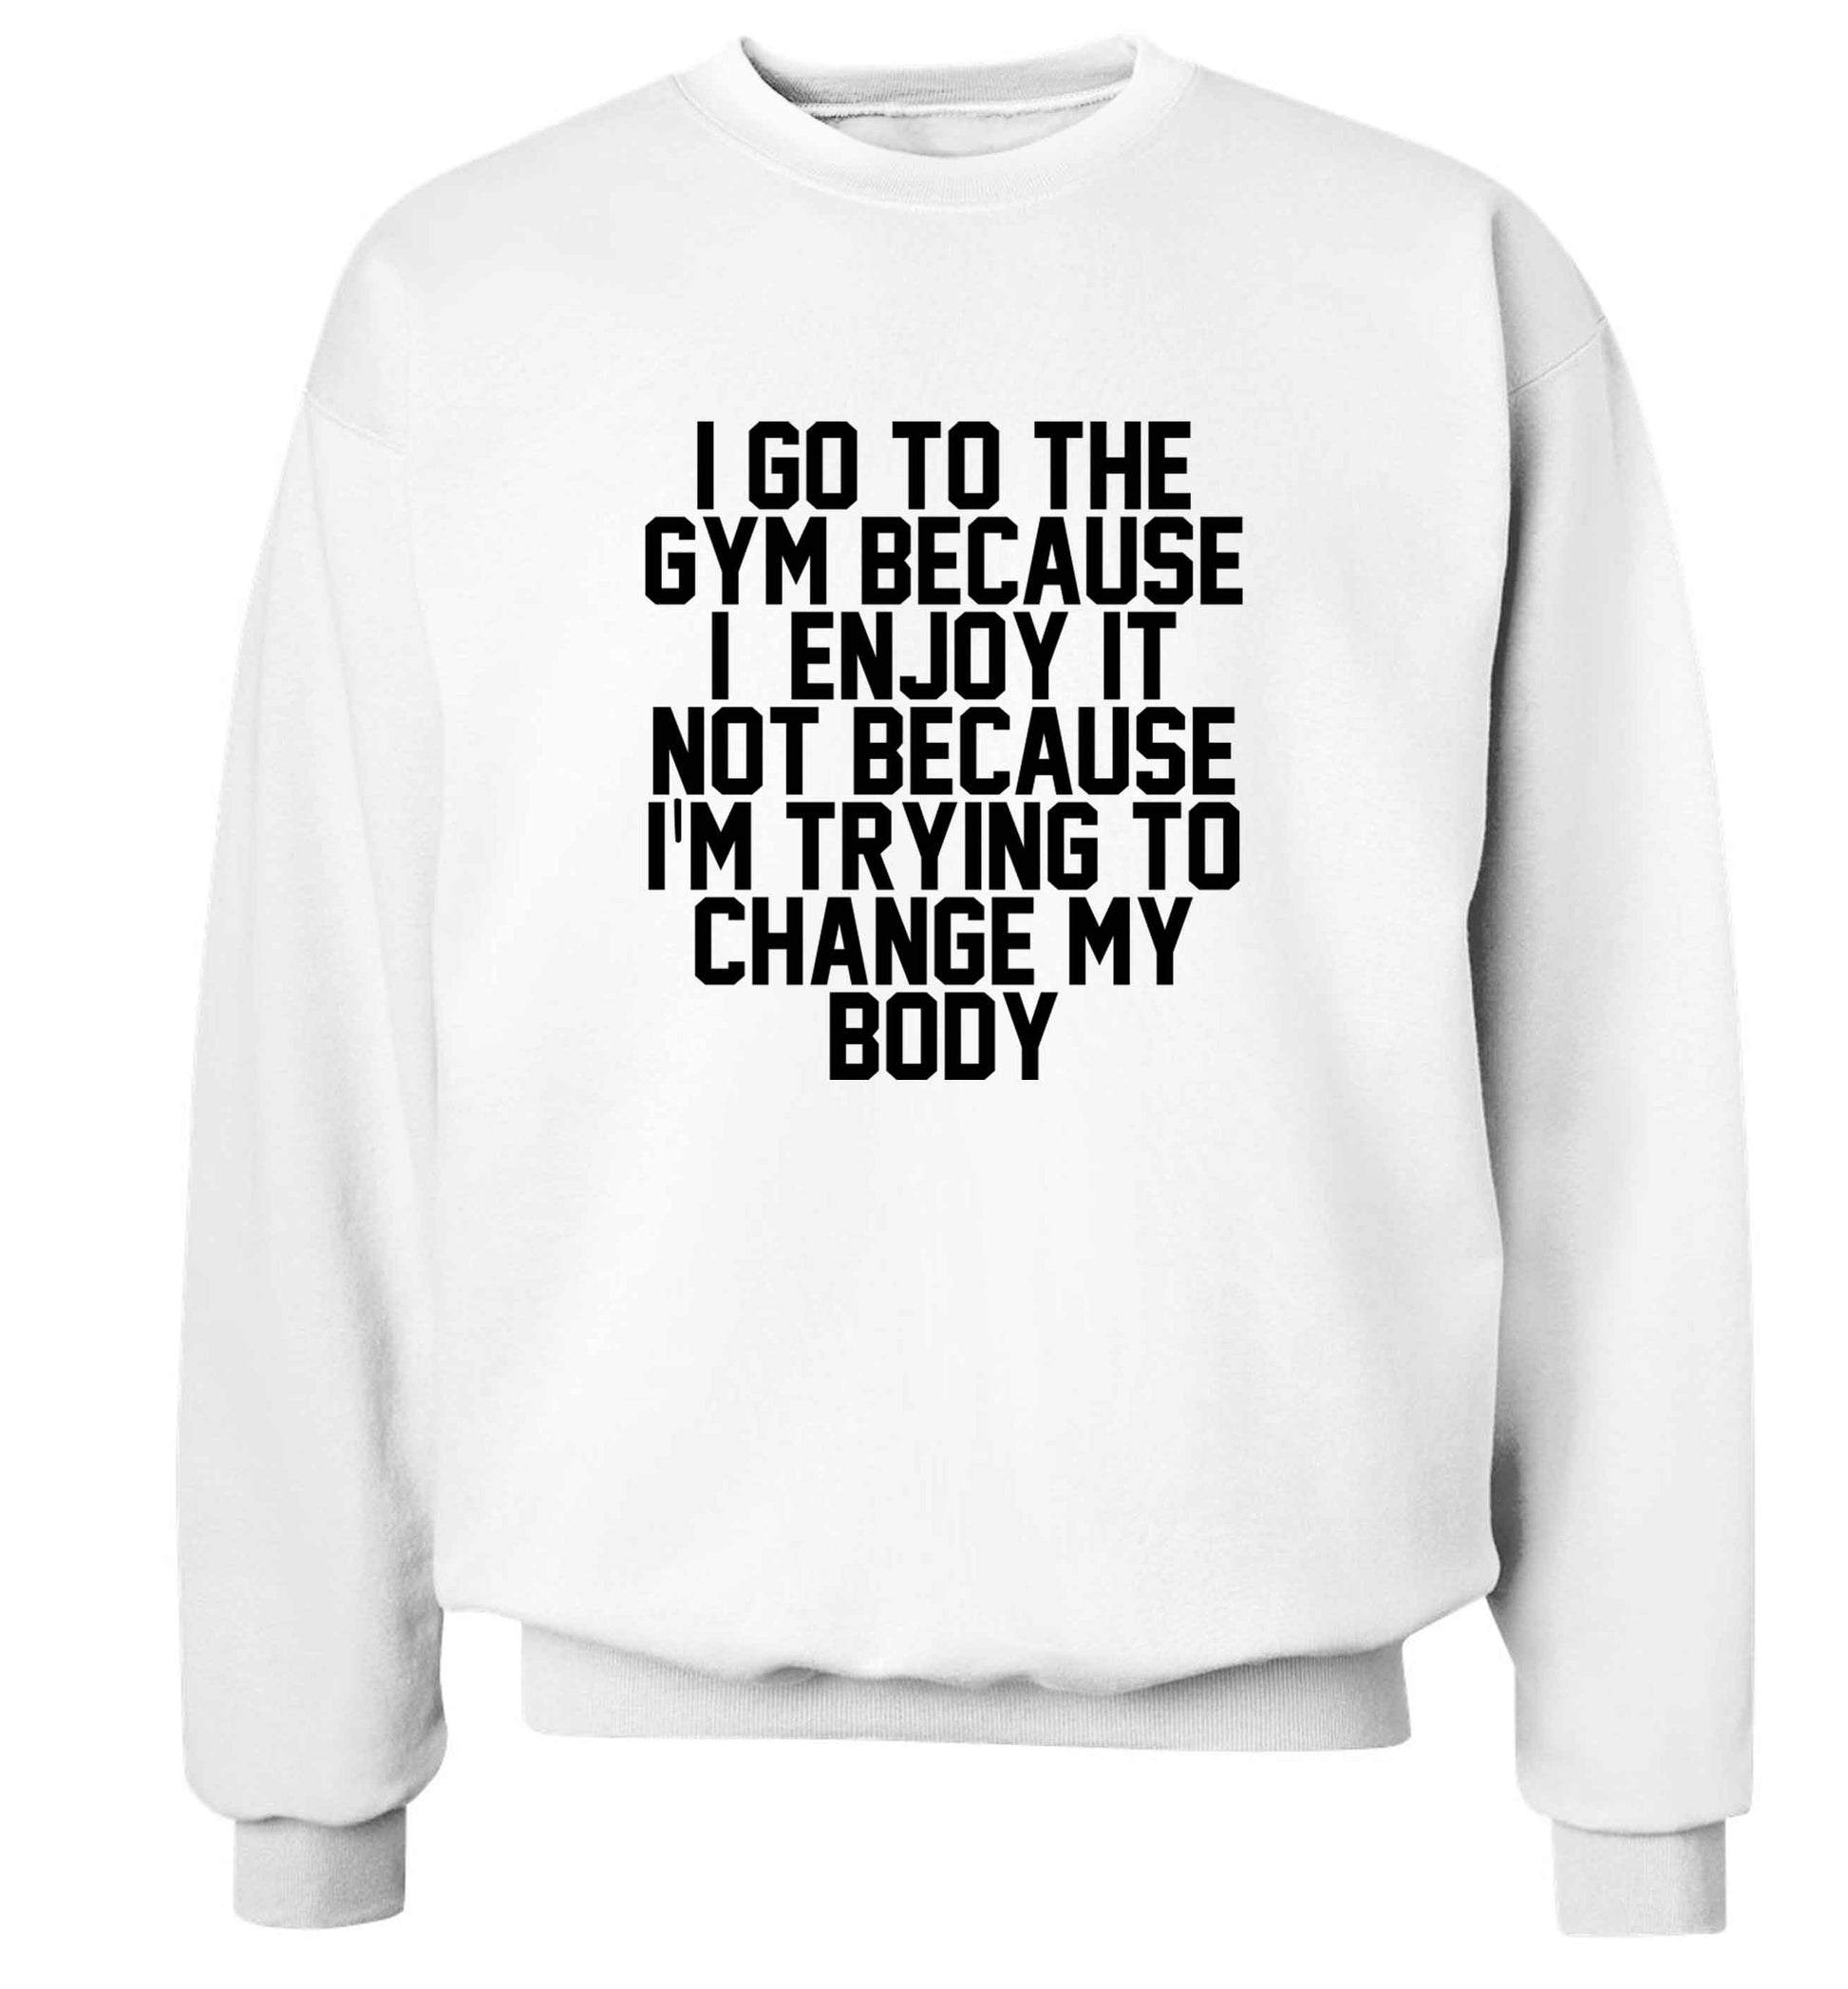 I go to the gym because I enjoy it not because I'm trying to change my body adult's unisex white sweater 2XL